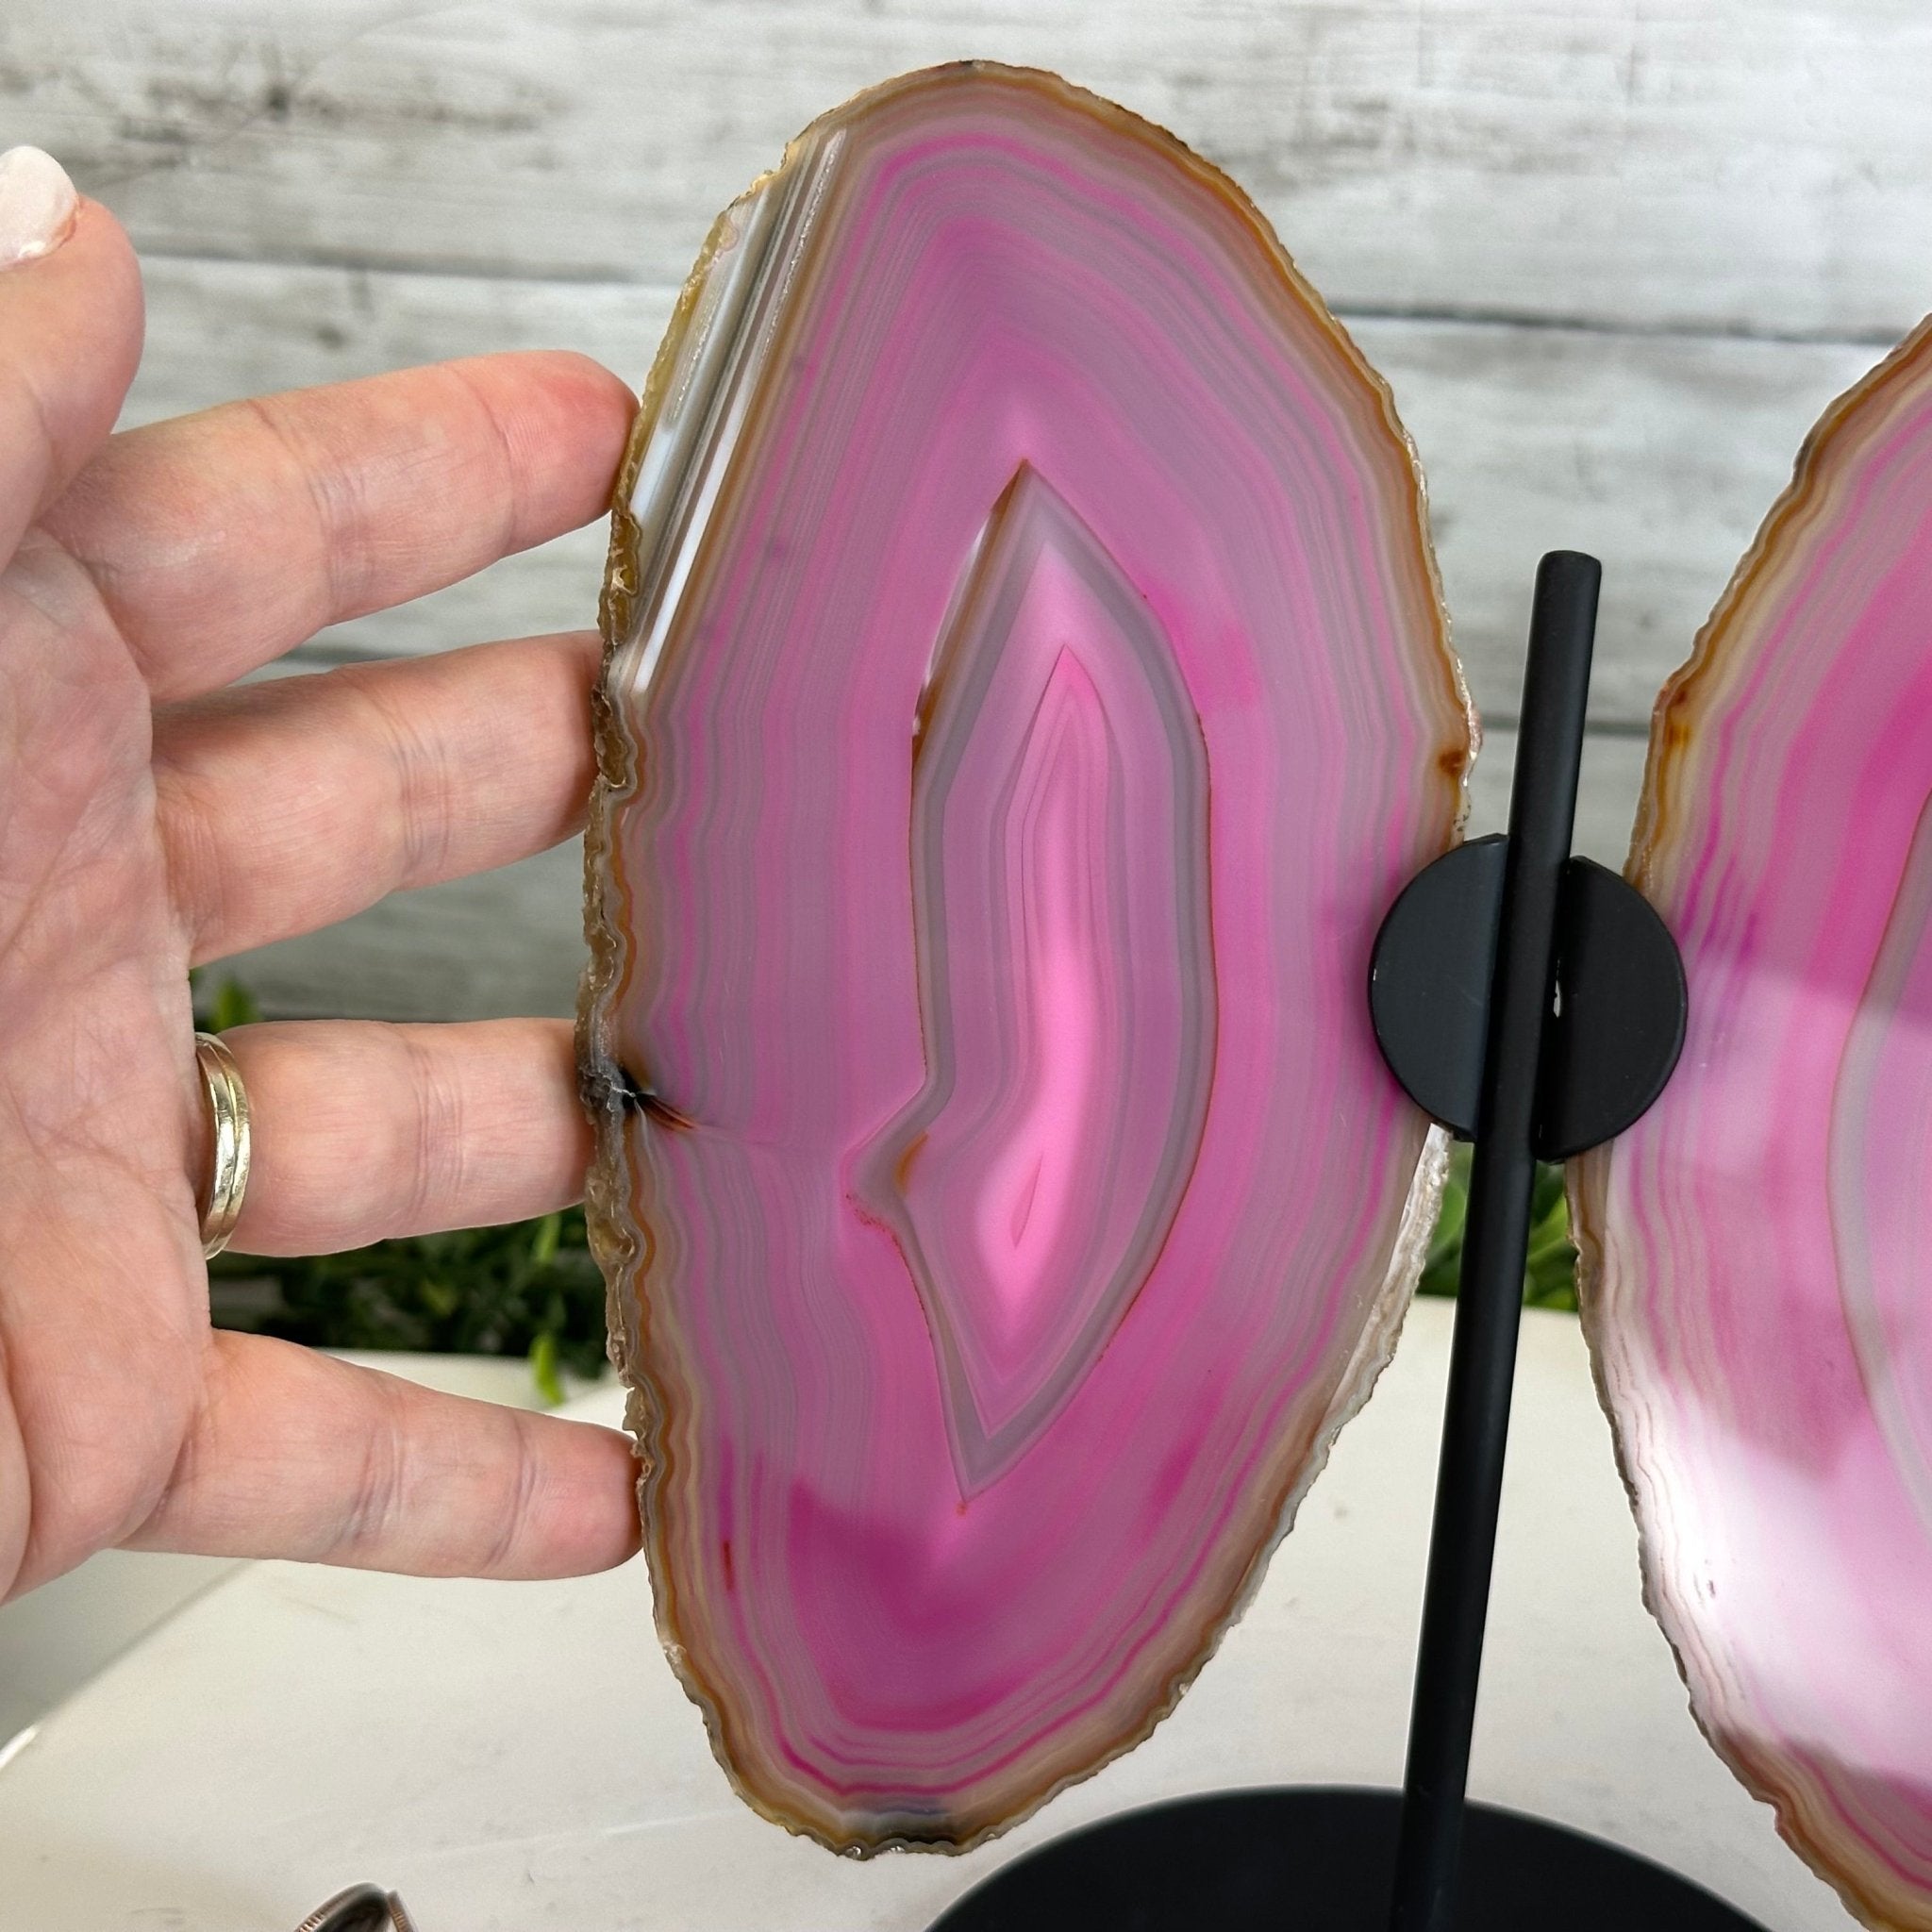 Pink Agate "Butterfly Wings", Dyed Pink, 8.7" Tall #5050PA-044 - Brazil GemsBrazil GemsPink Agate "Butterfly Wings", Dyed Pink, 8.7" Tall #5050PA-044Agate Butterfly Wings5050PA-044